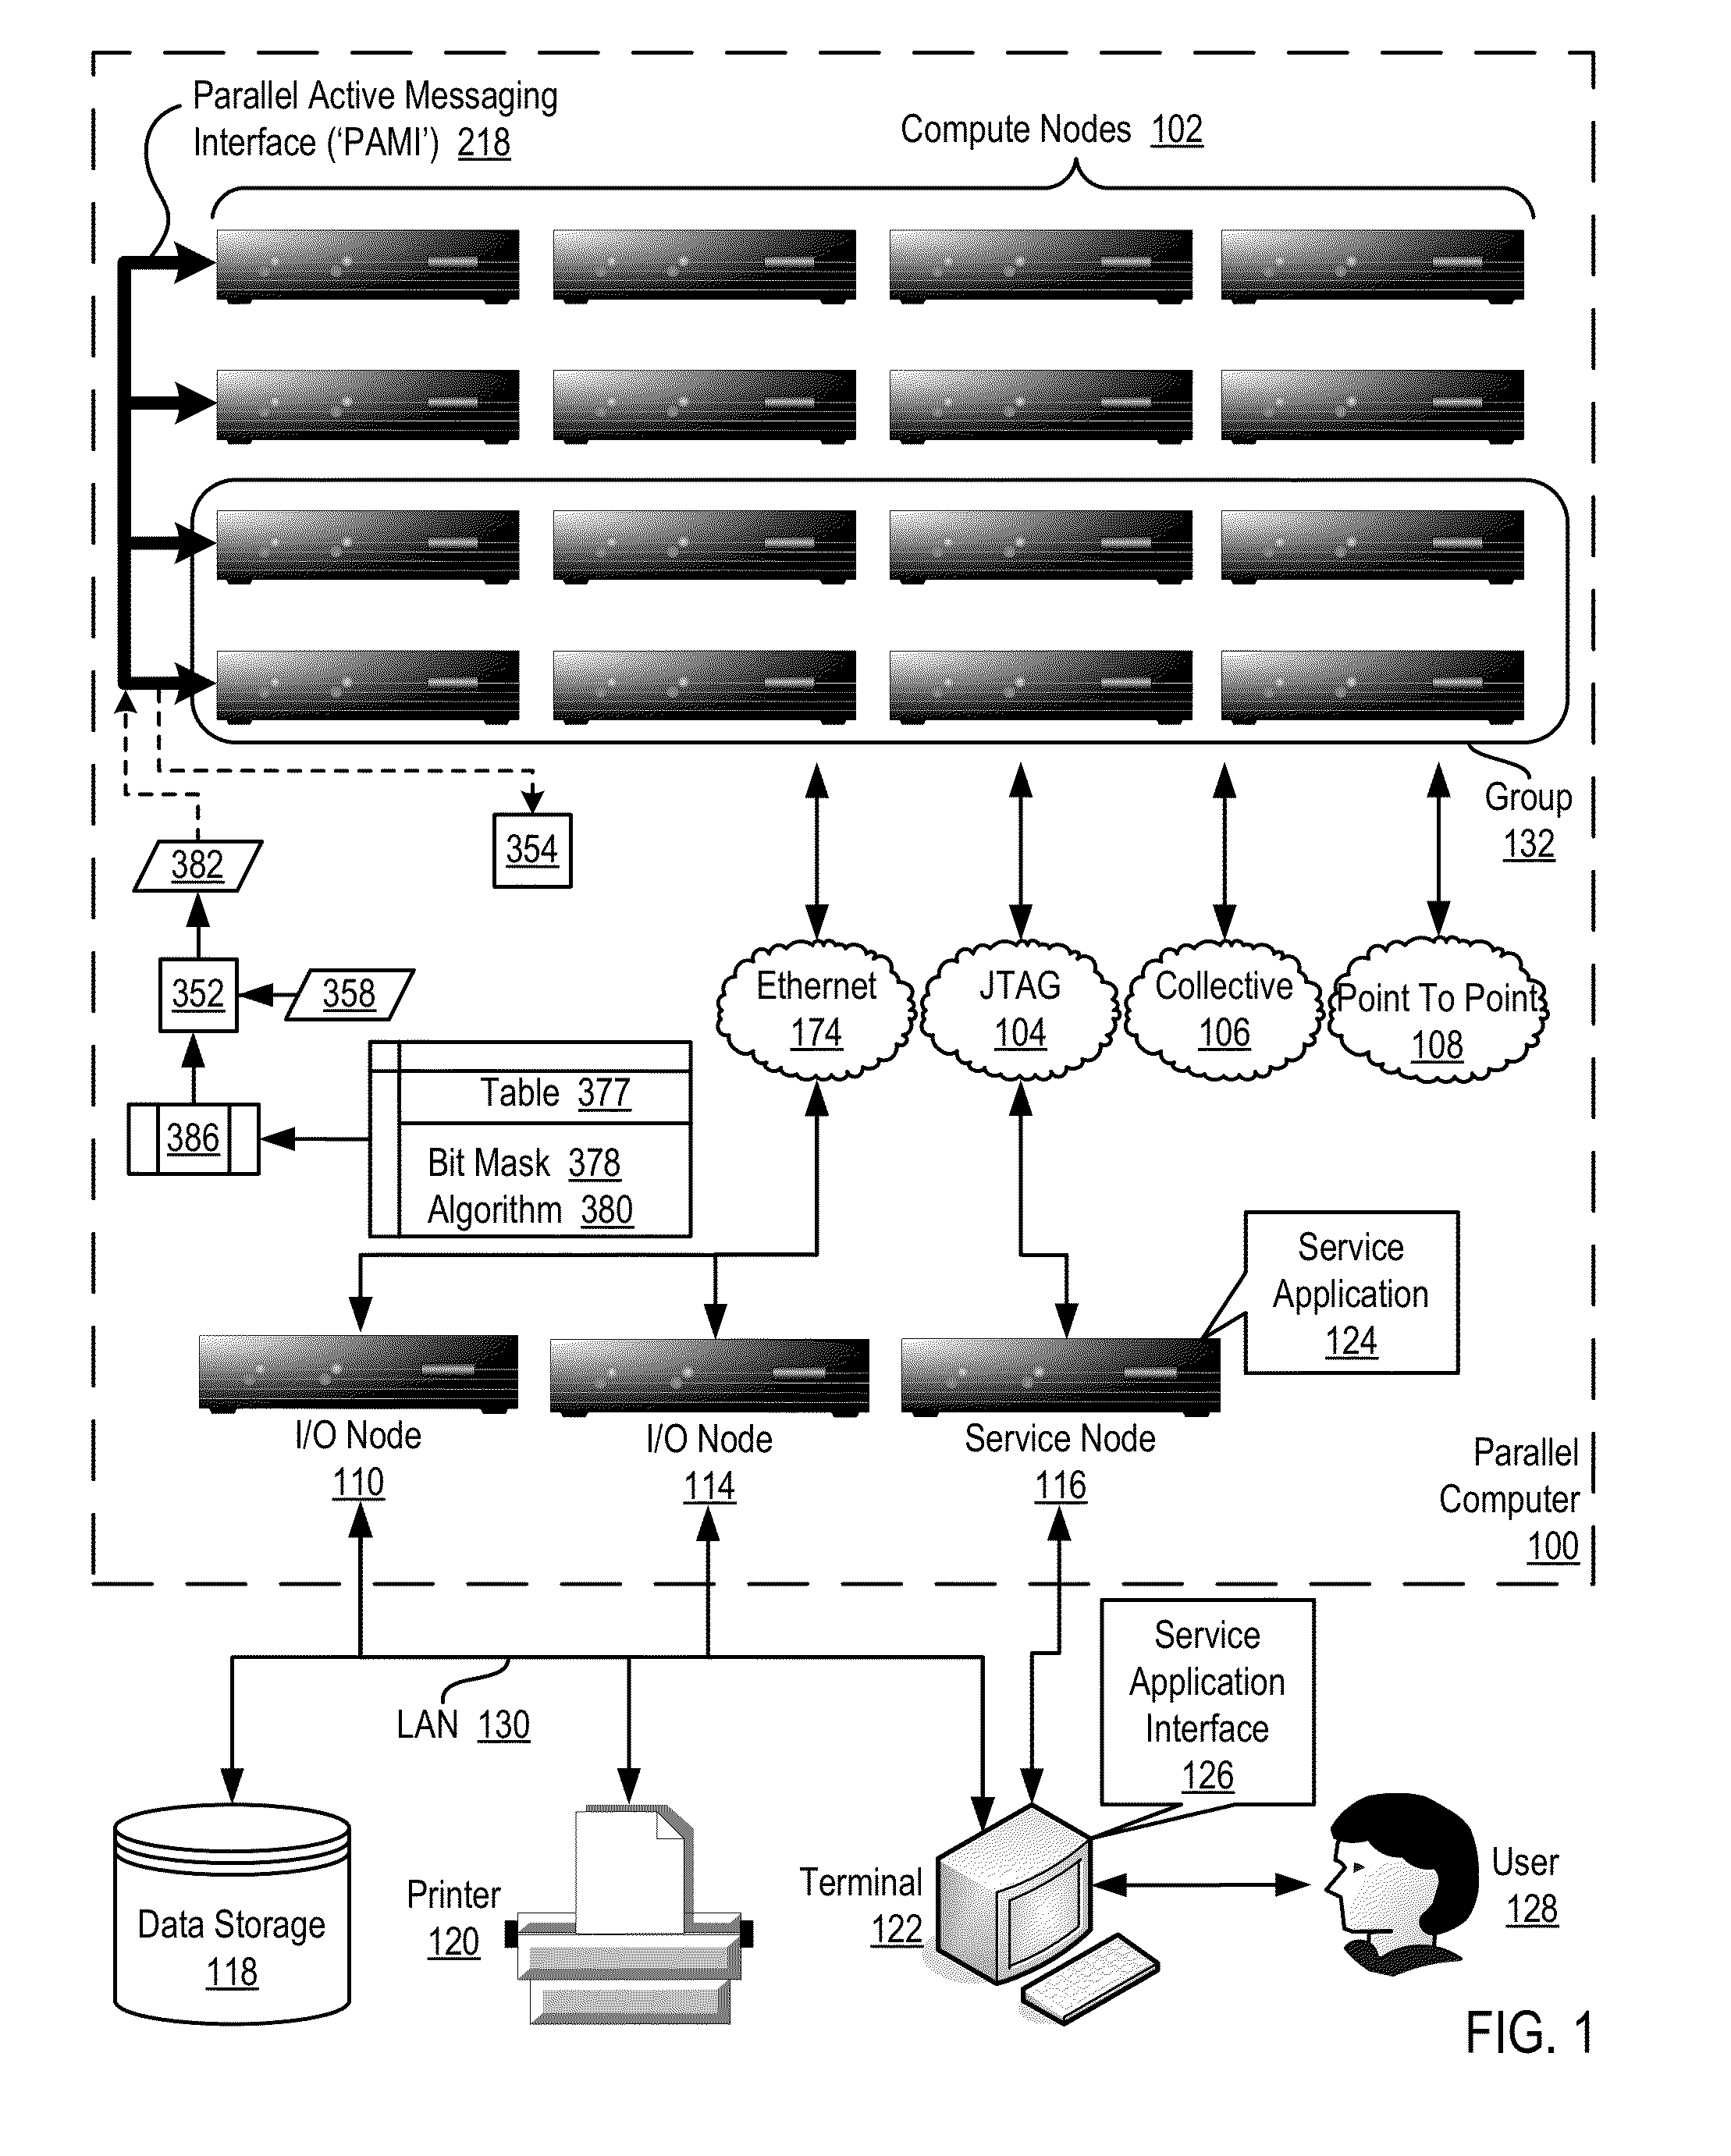 Data communications for a collective operation in a parallel active messaging interface of a parallel computer